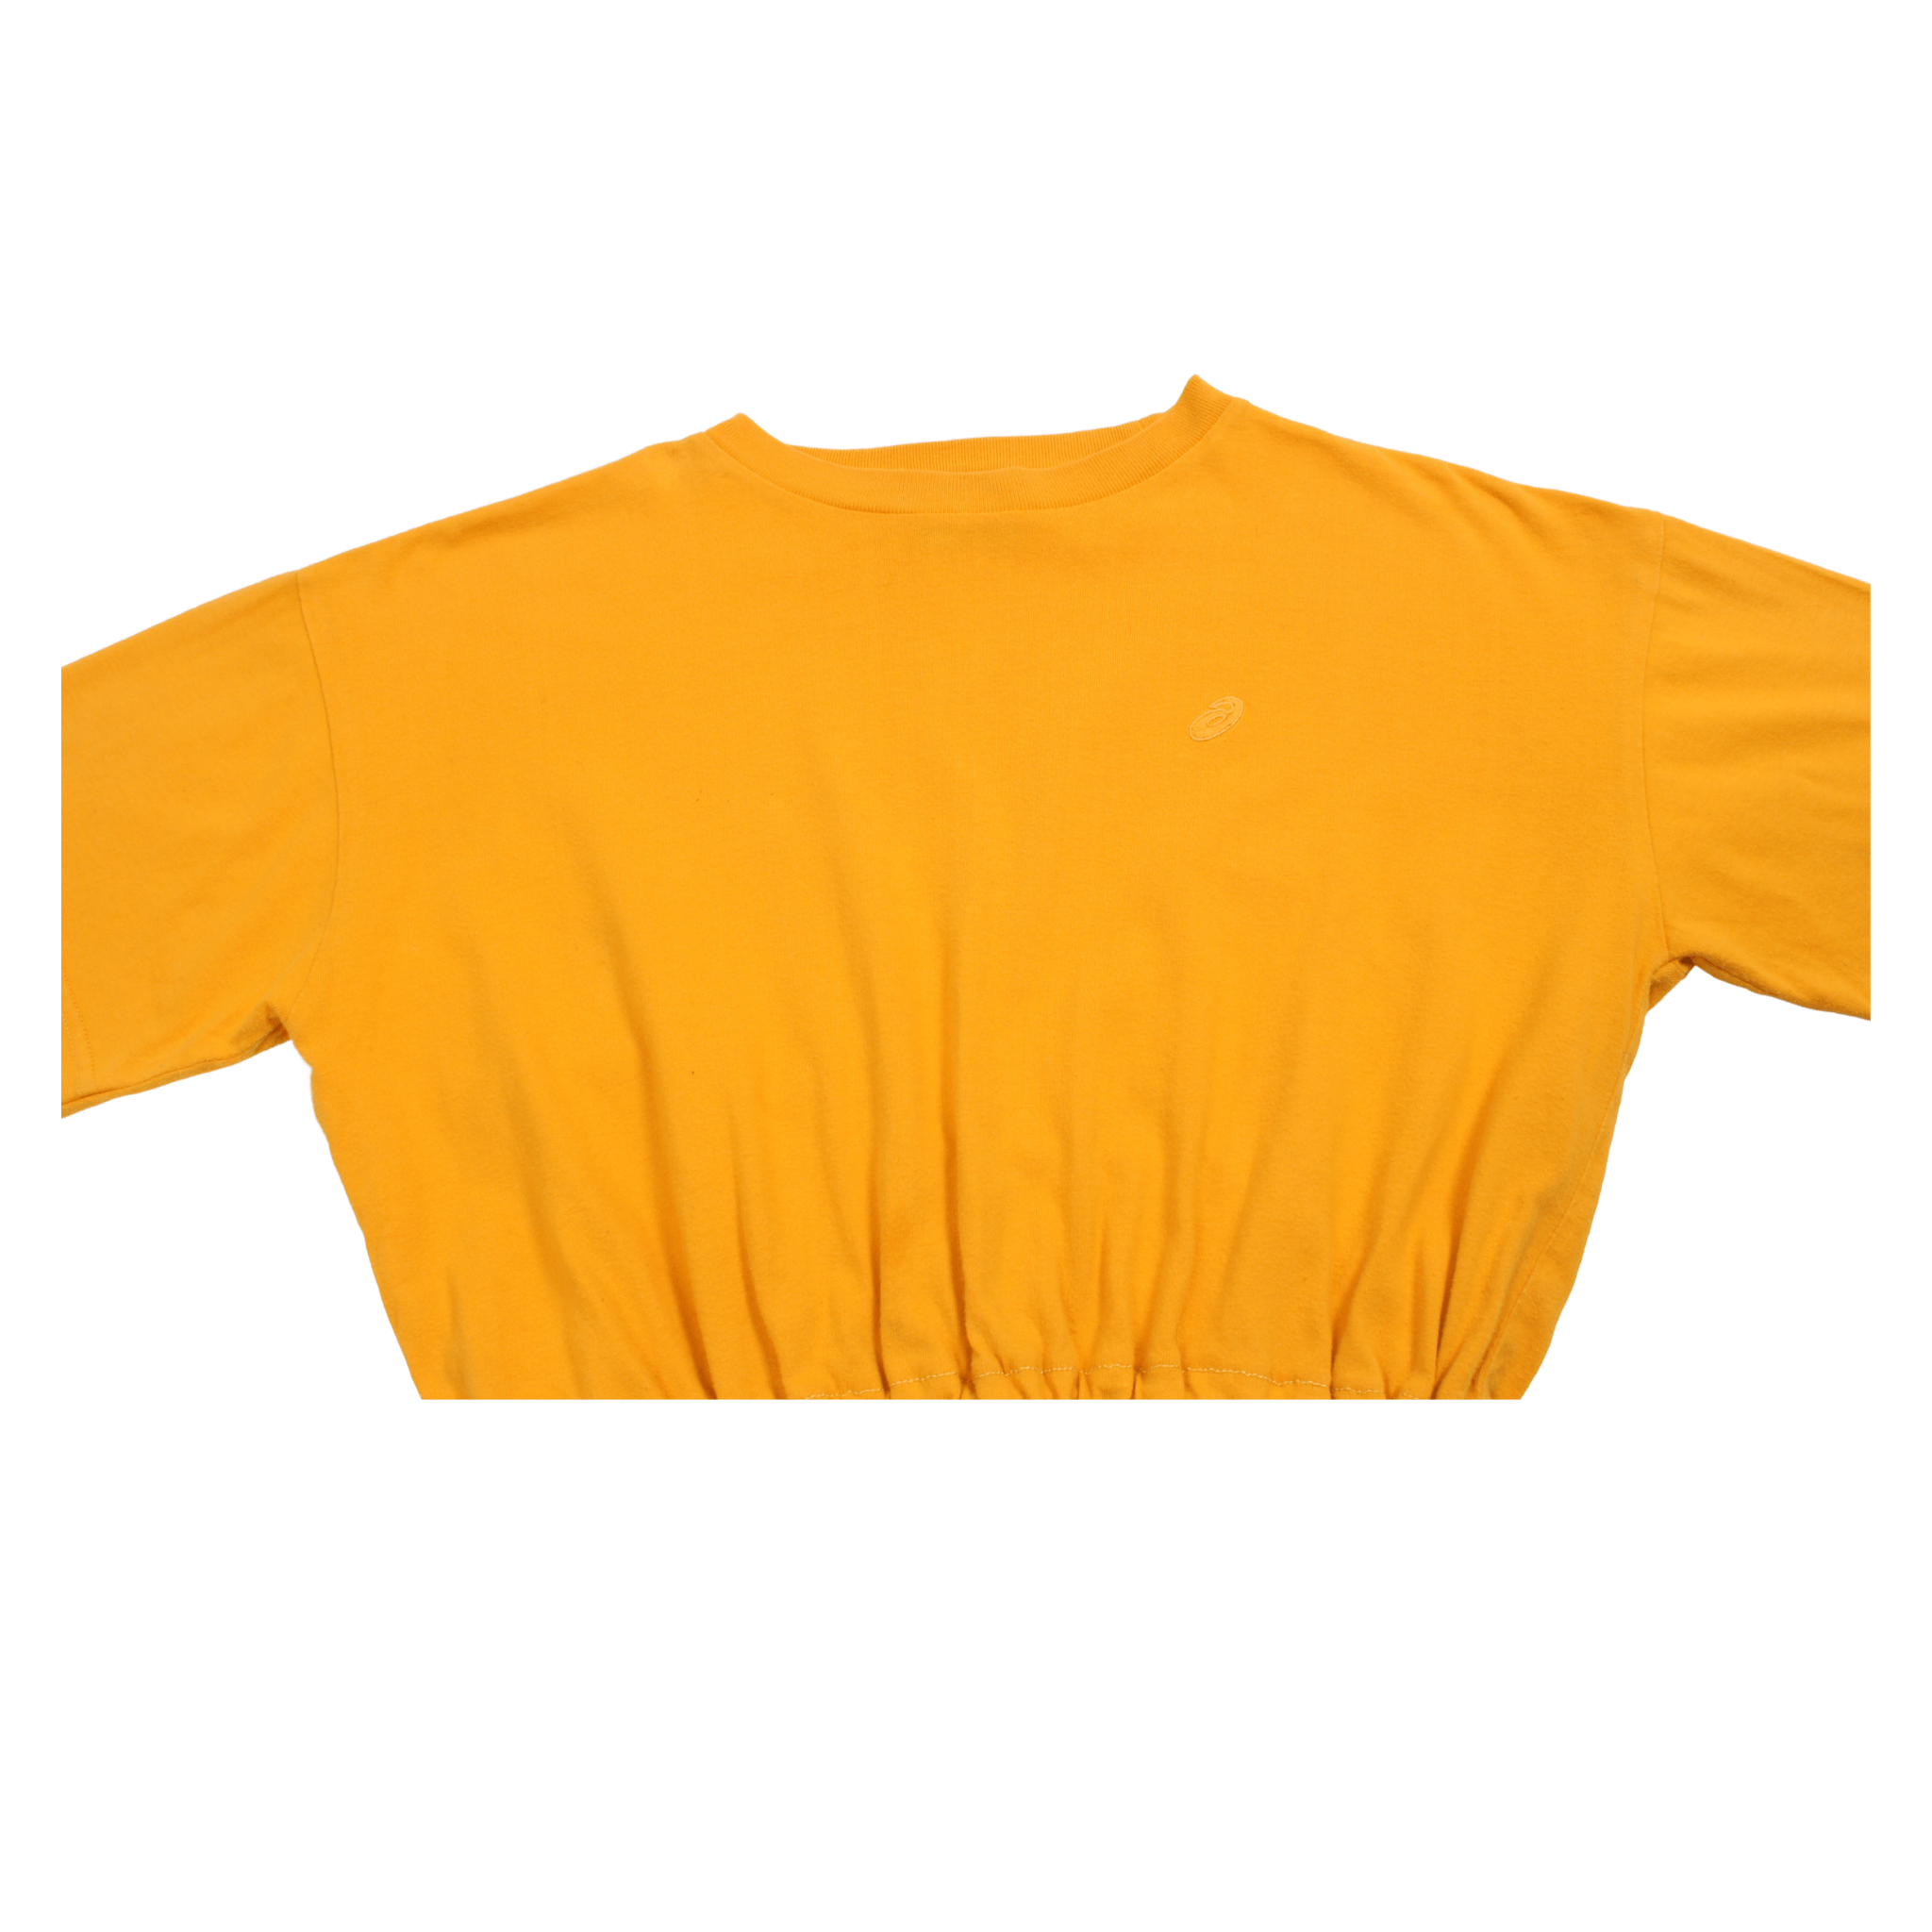 Vintage Asics Reworked Cropped T Shirt (S)